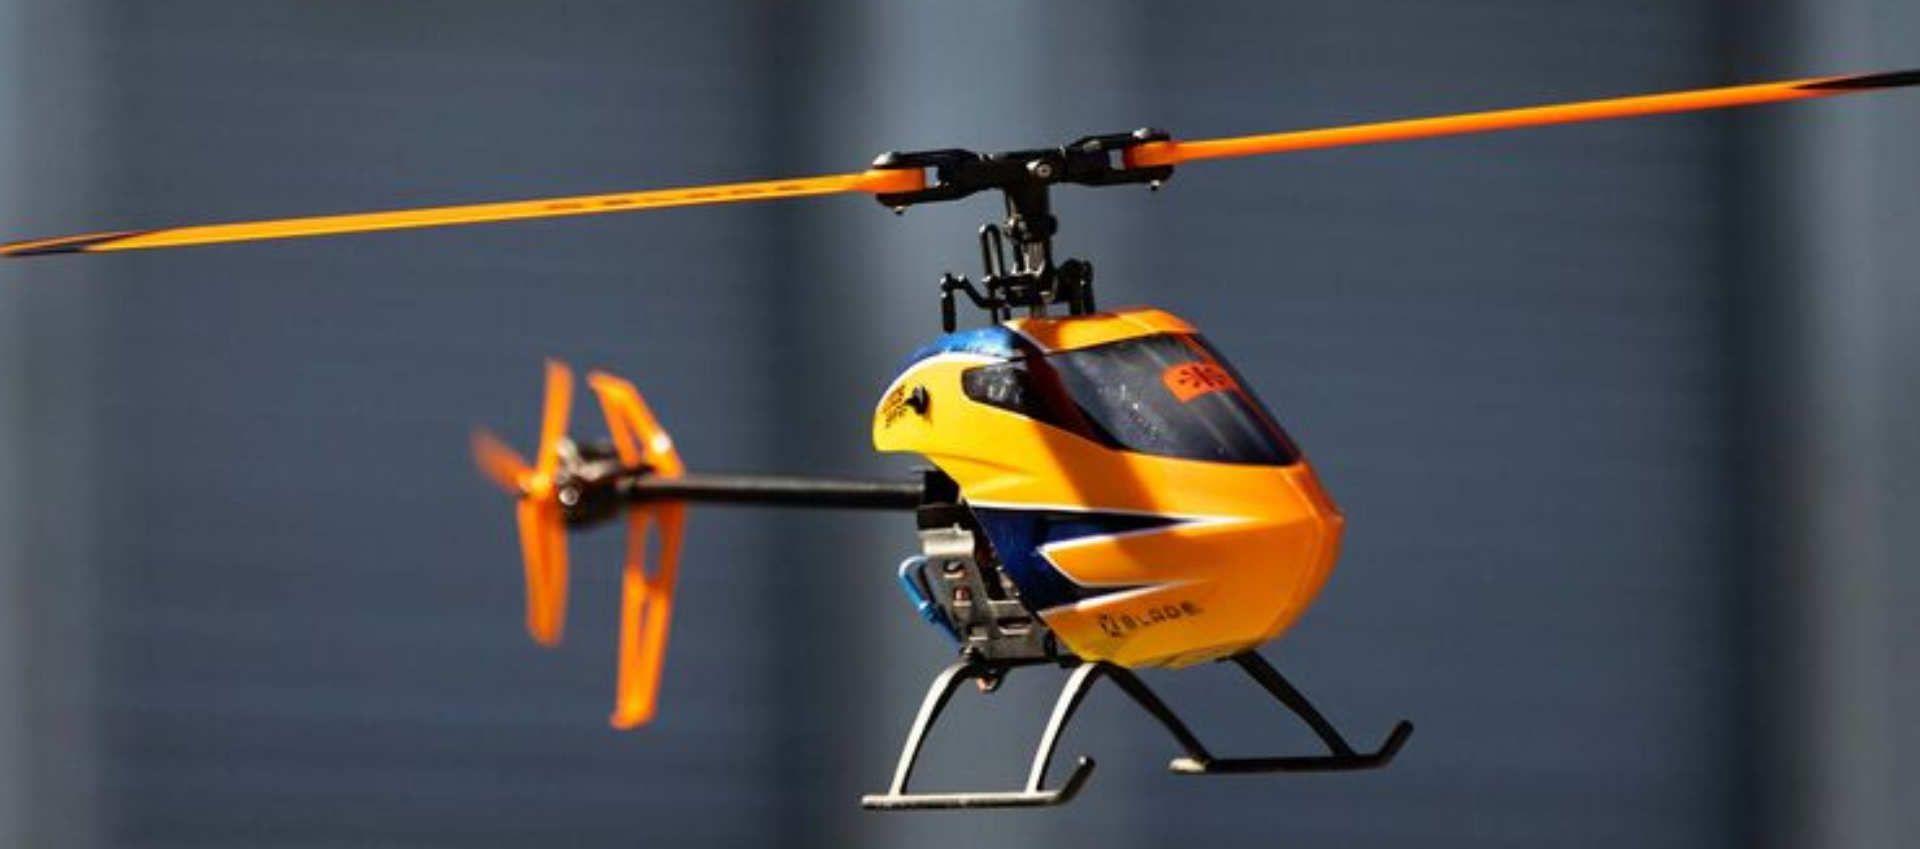 Heli Rc: Choosing the Right RC Helicopter Kit for Your Skill Level